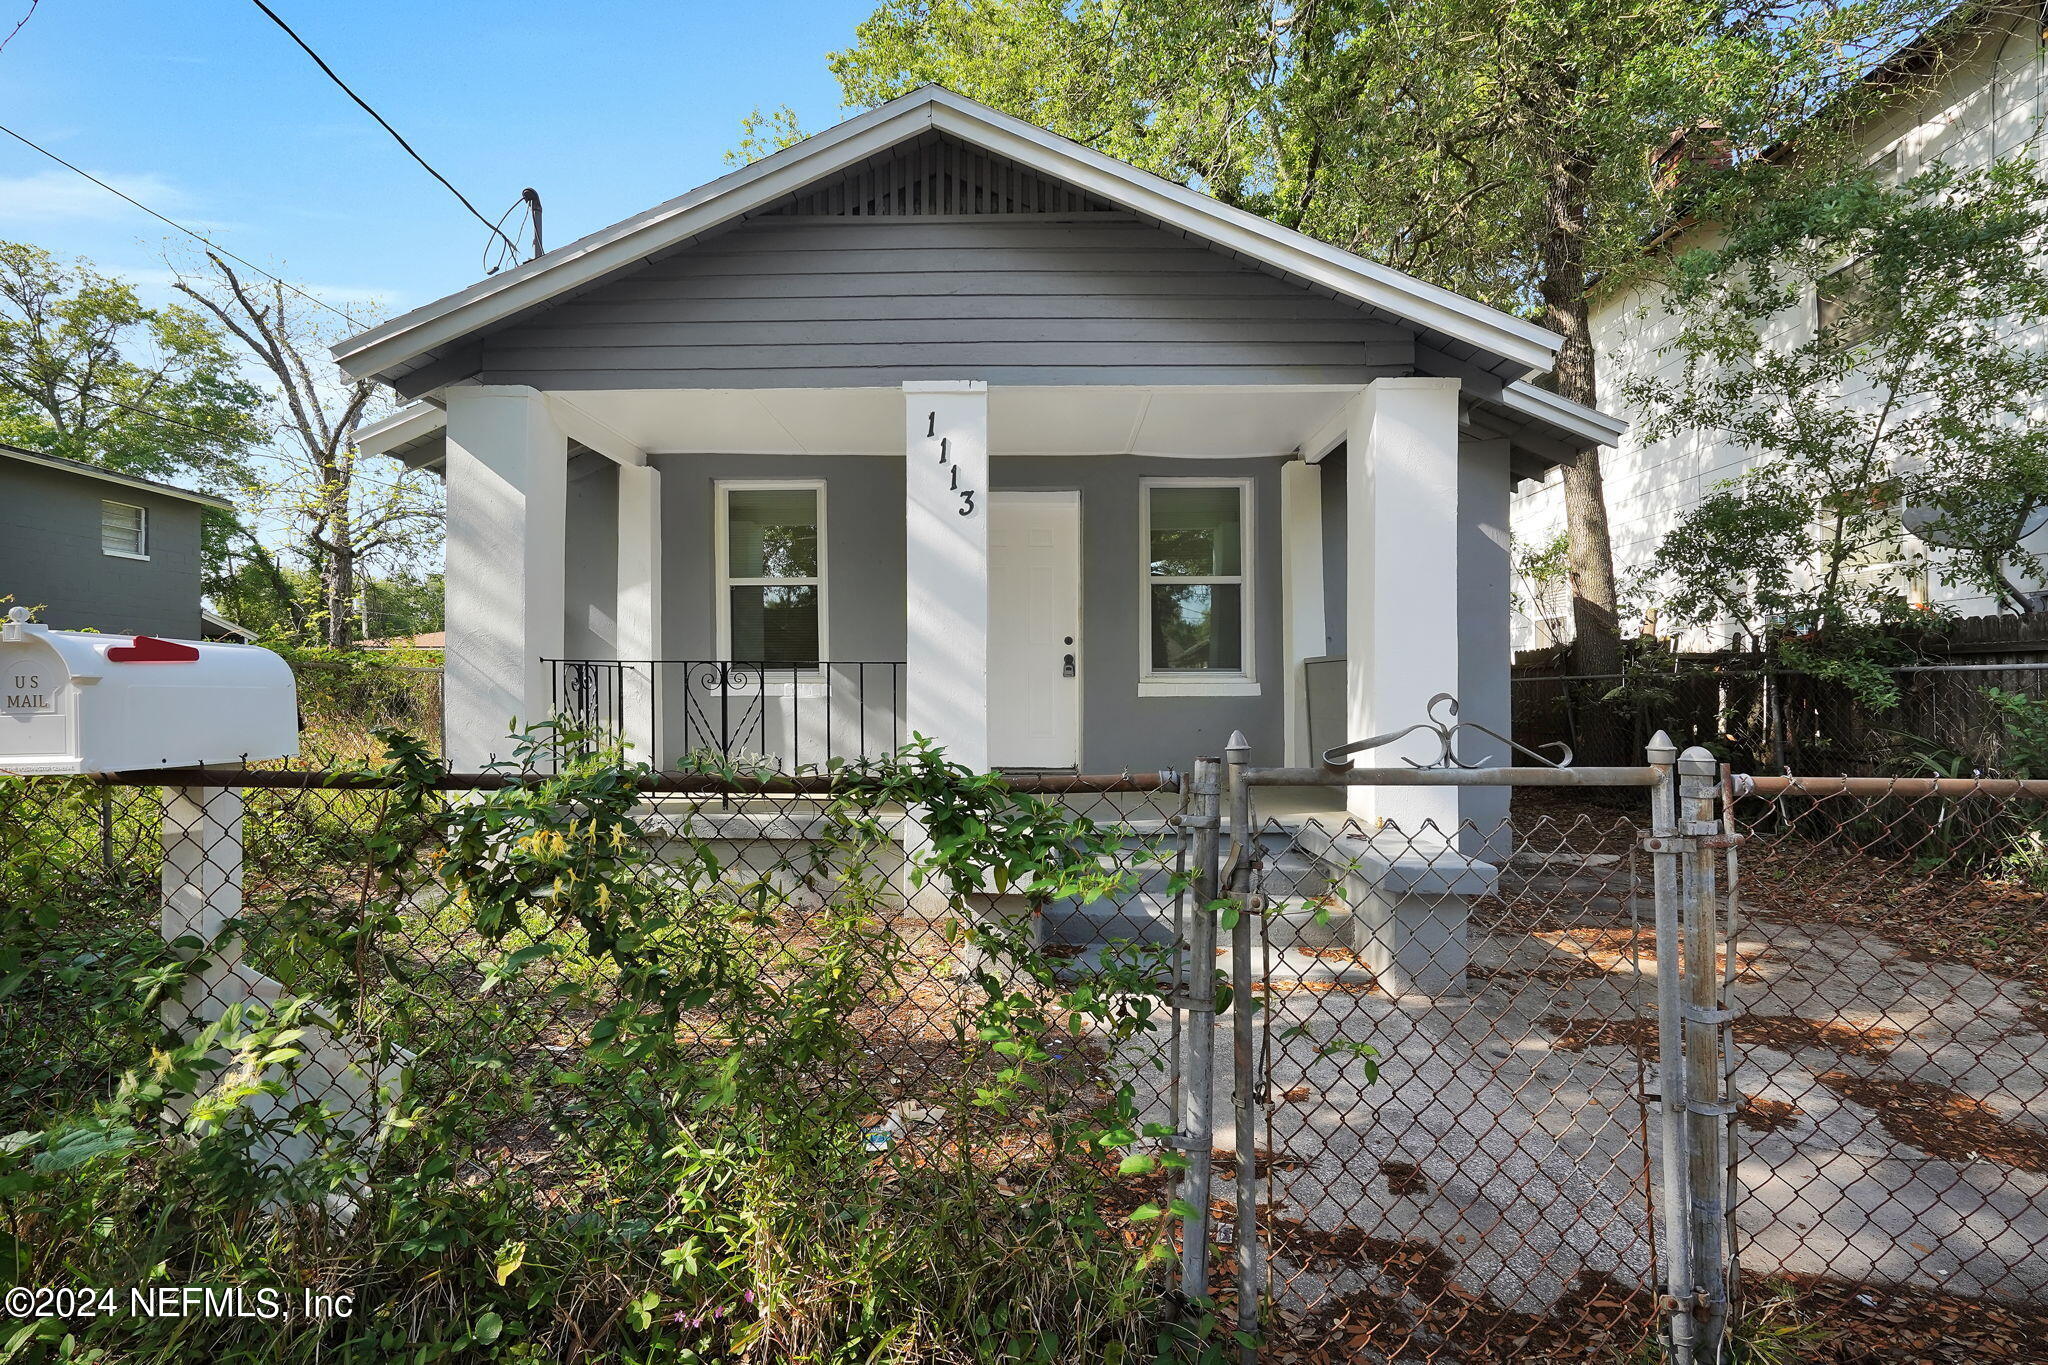 Jacksonville, FL home for sale located at 1113 W 5th Street, Jacksonville, FL 32209